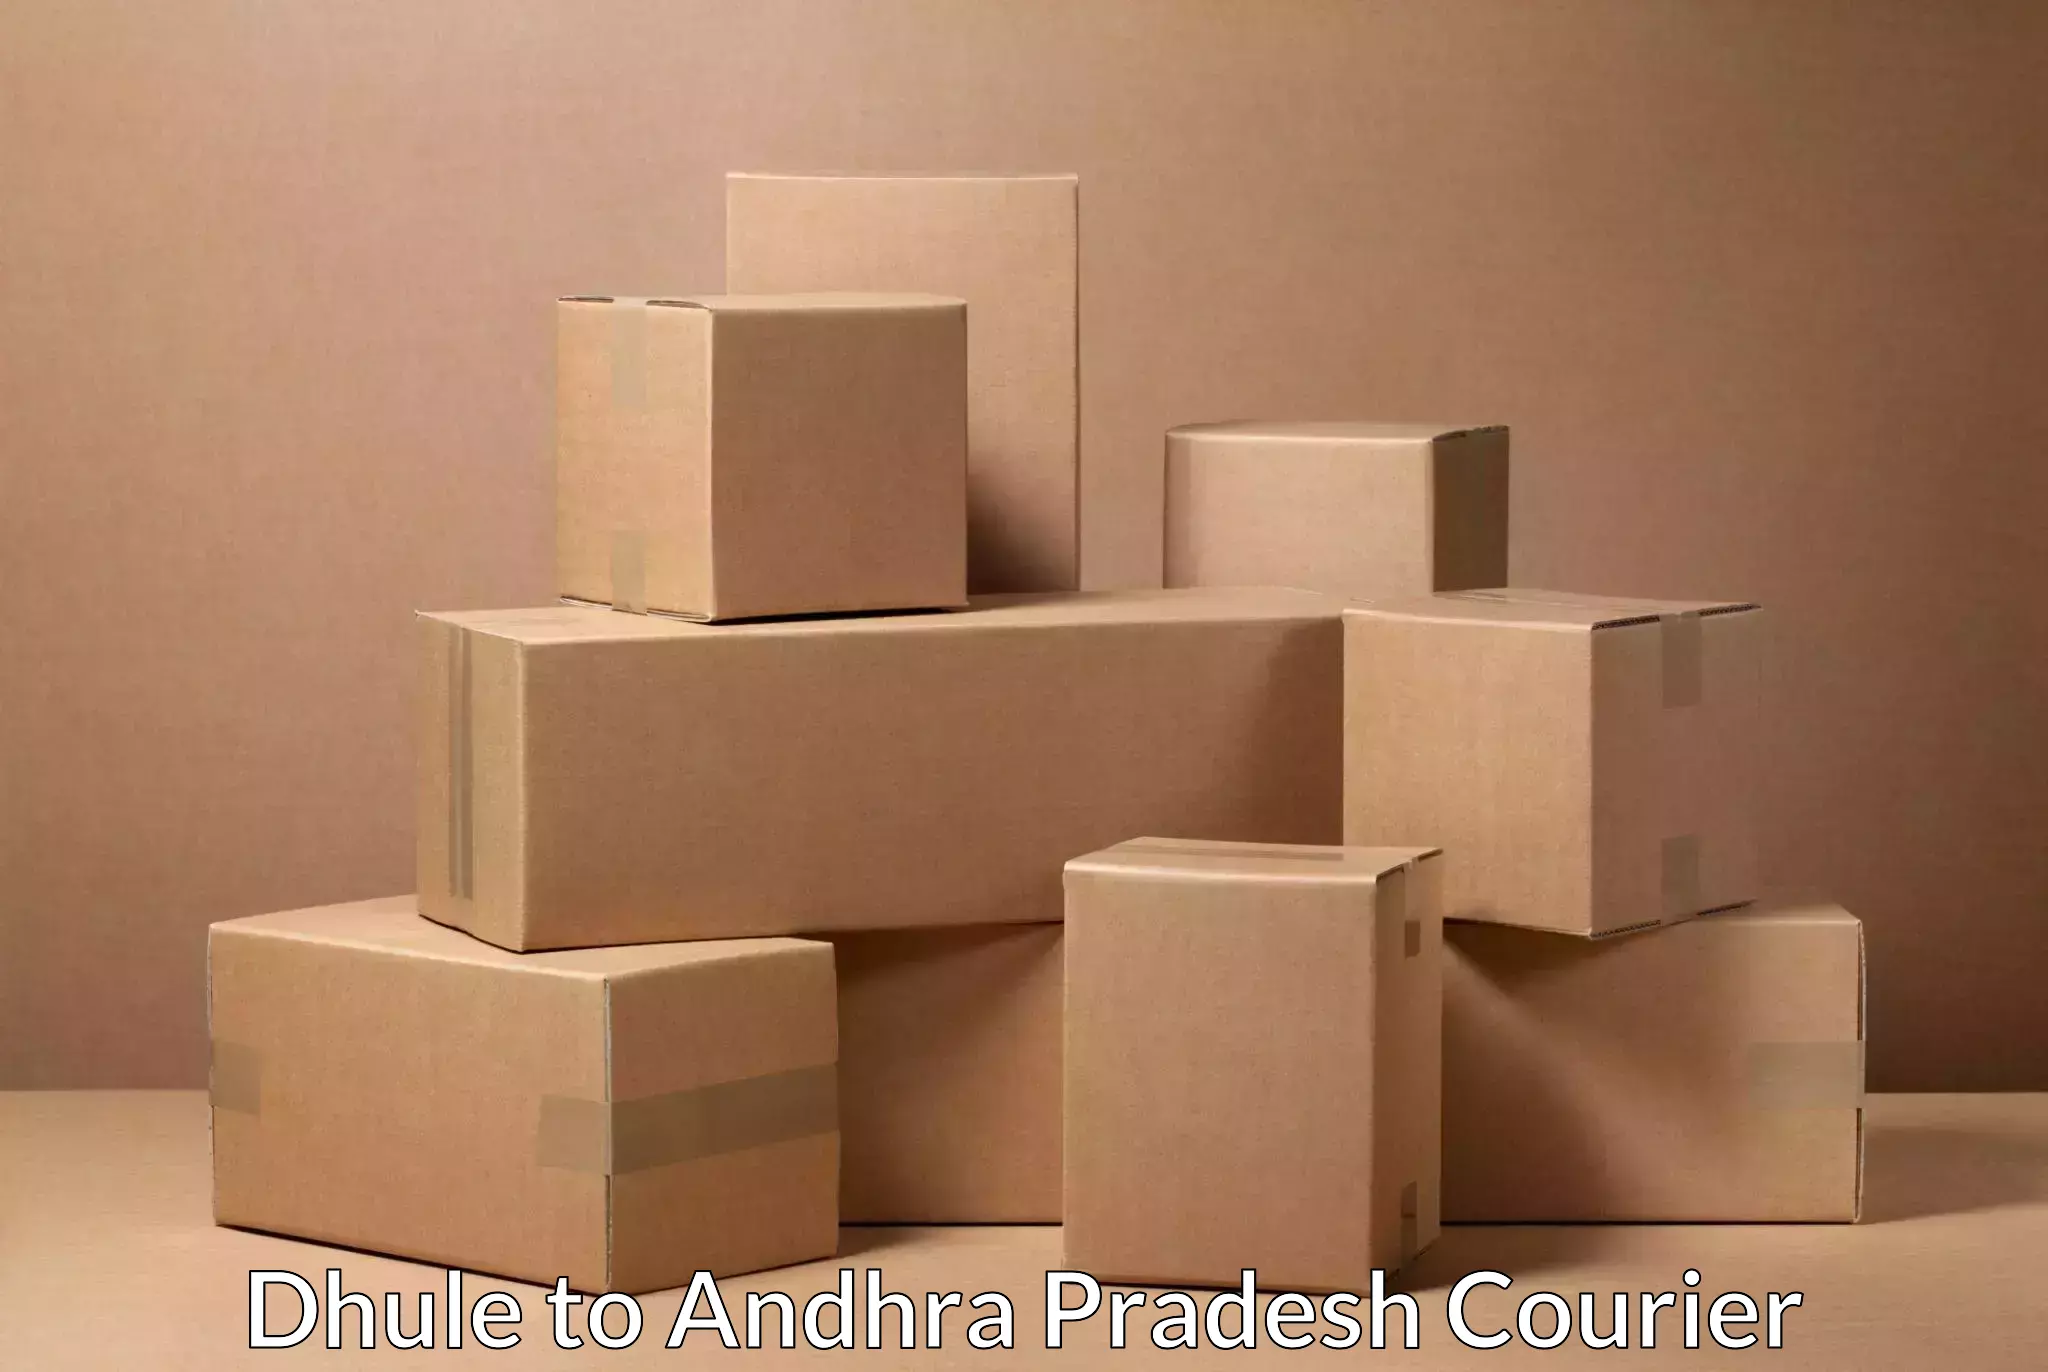 Affordable parcel service Dhule to Ongole